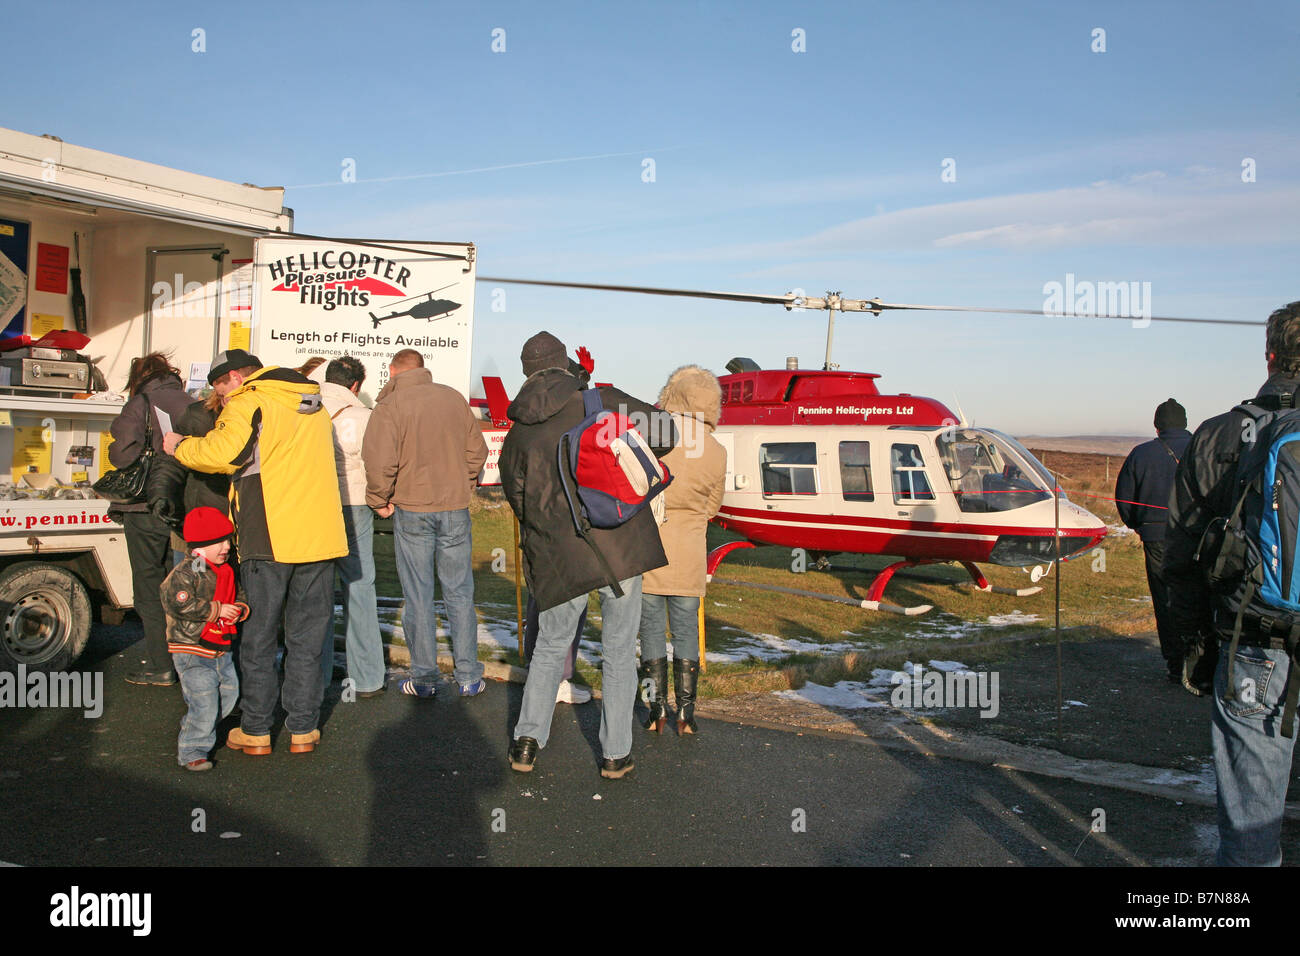 A small helicopter with people waiting to board for a pleasure flight Stock Photo